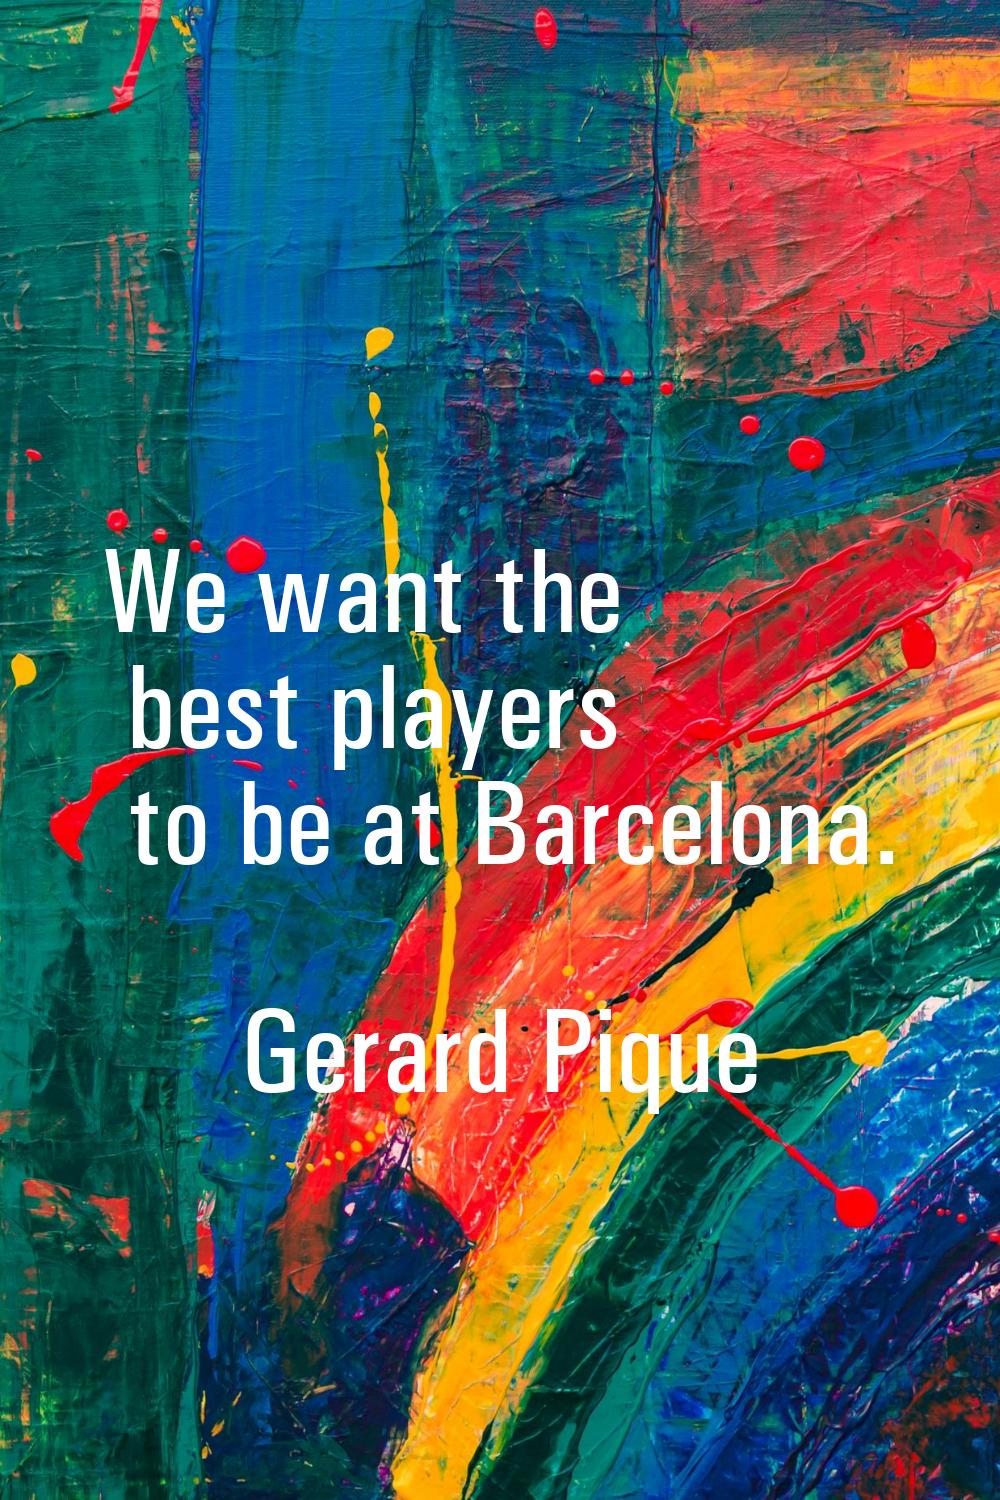 We want the best players to be at Barcelona.